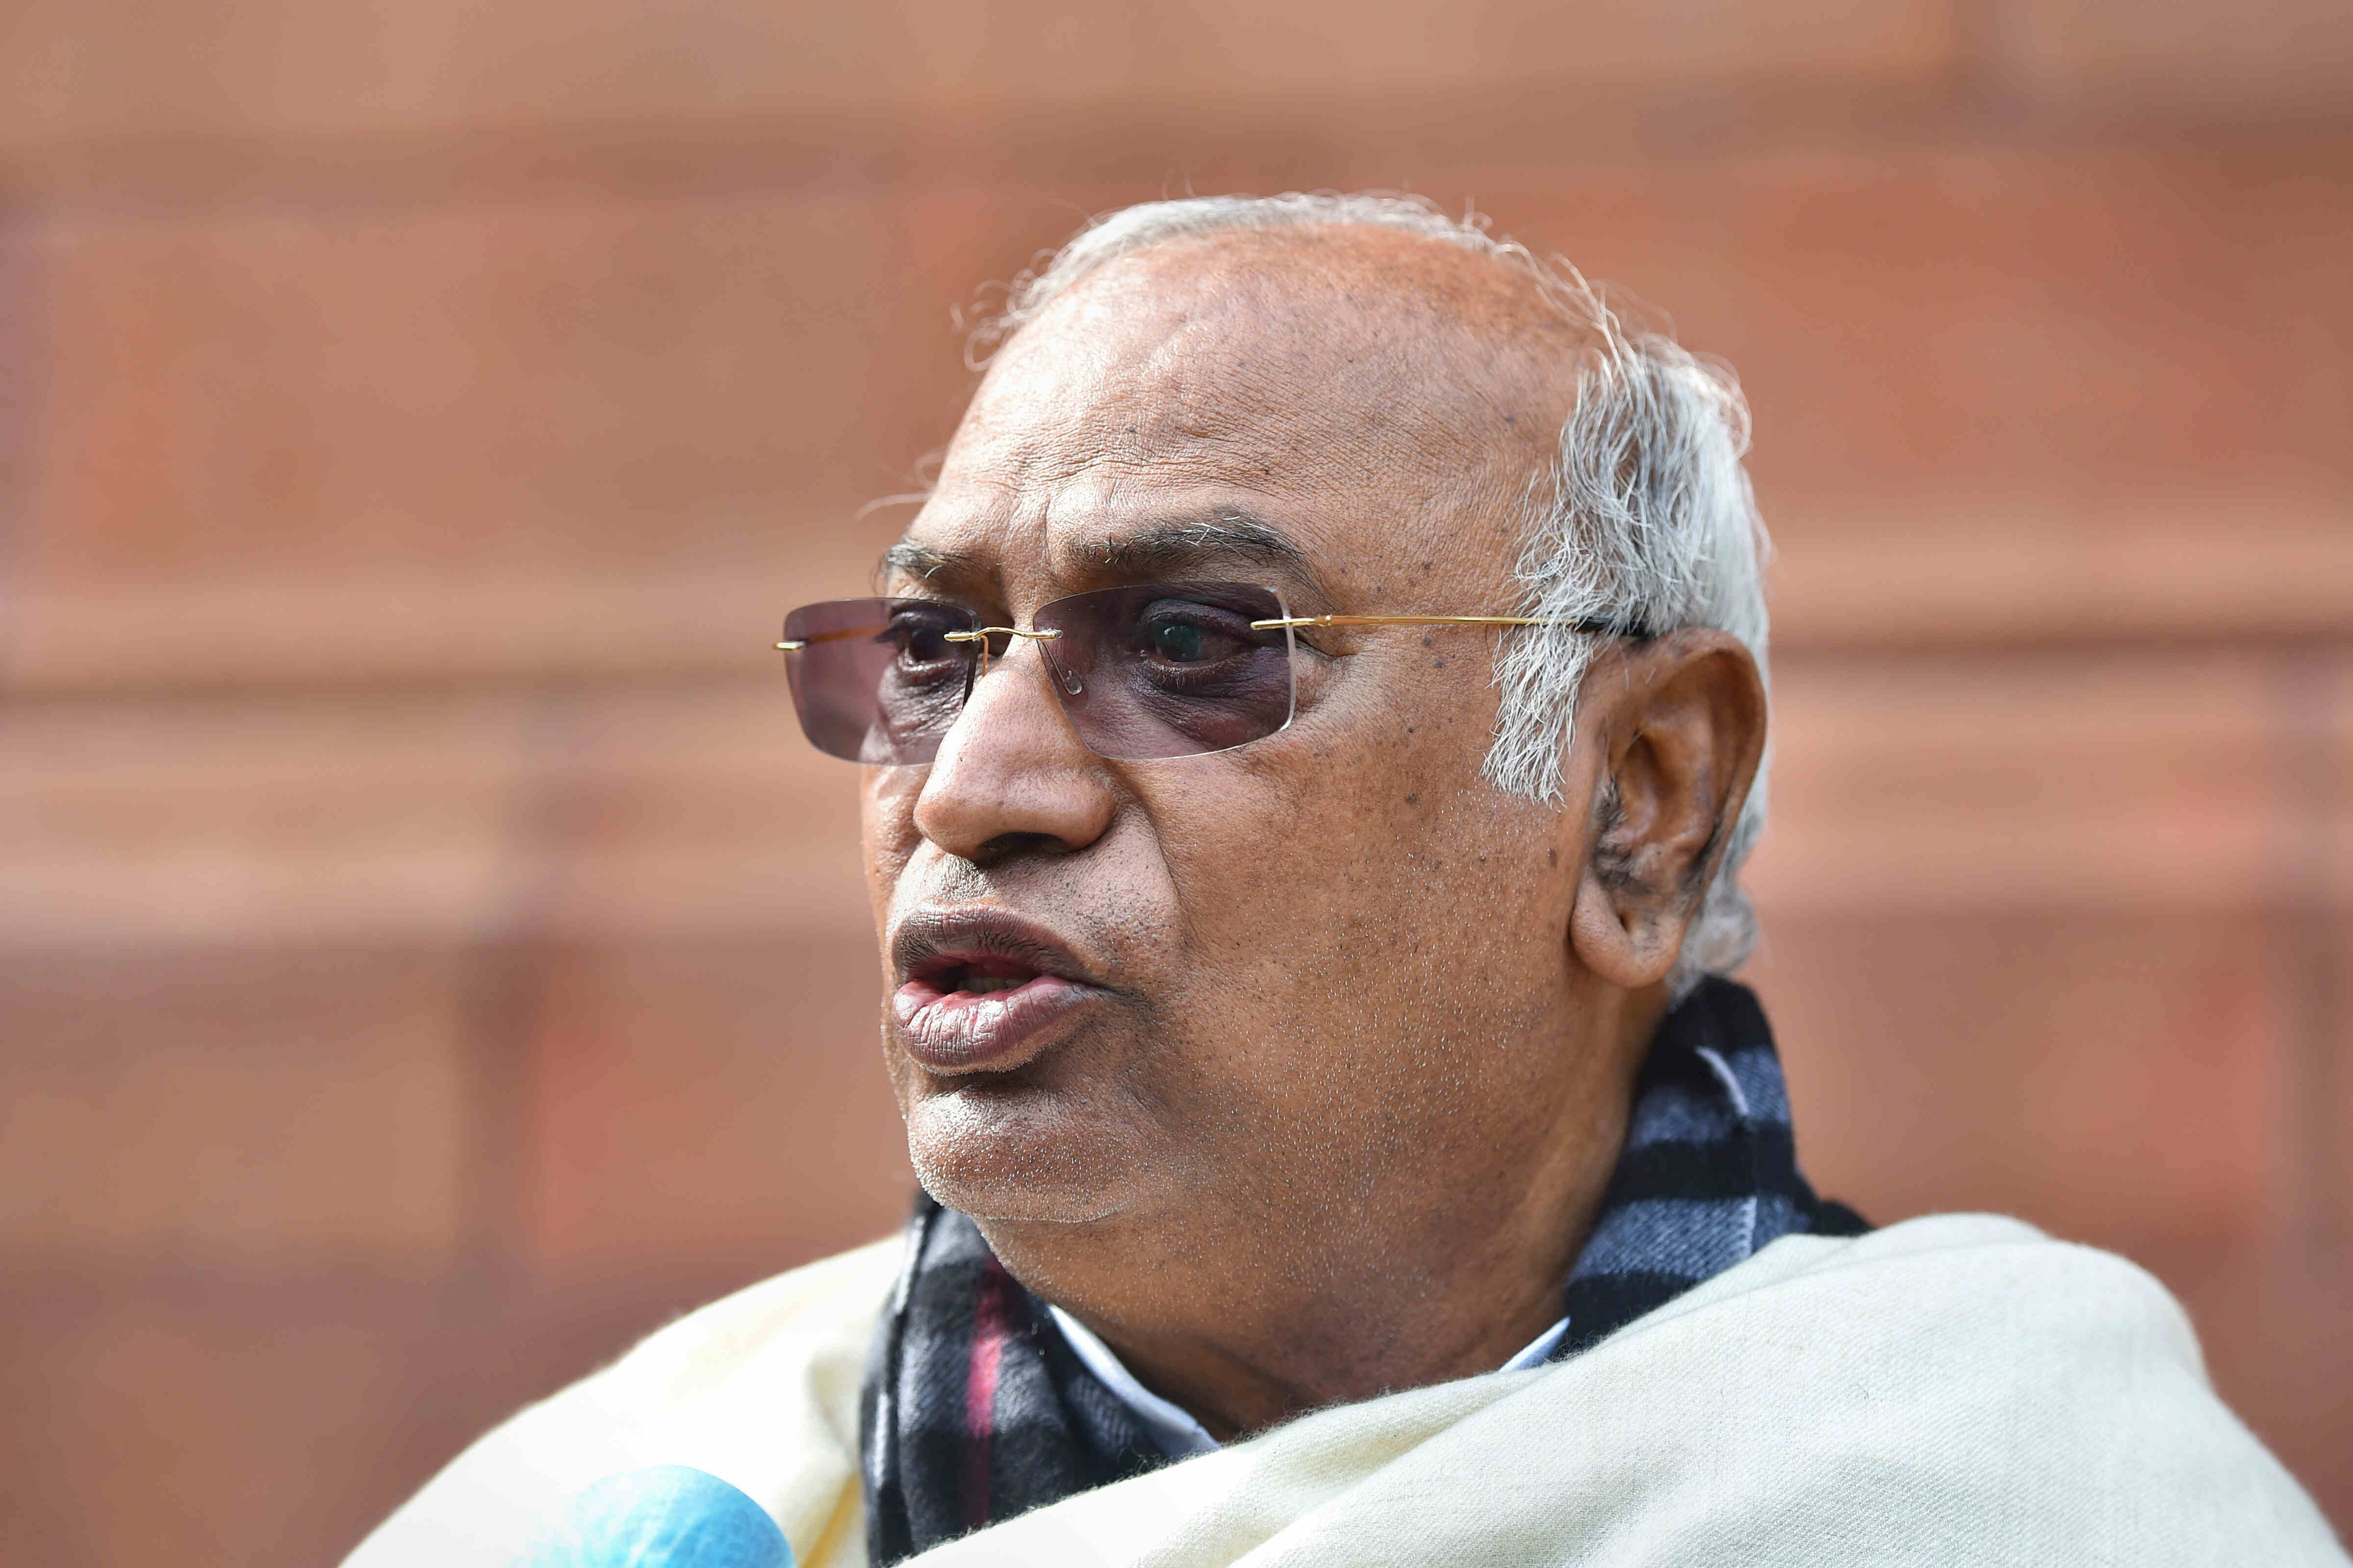 Told Tharoor better to have consensus candidate, but he wanted contest: Mallikarjun Kharge